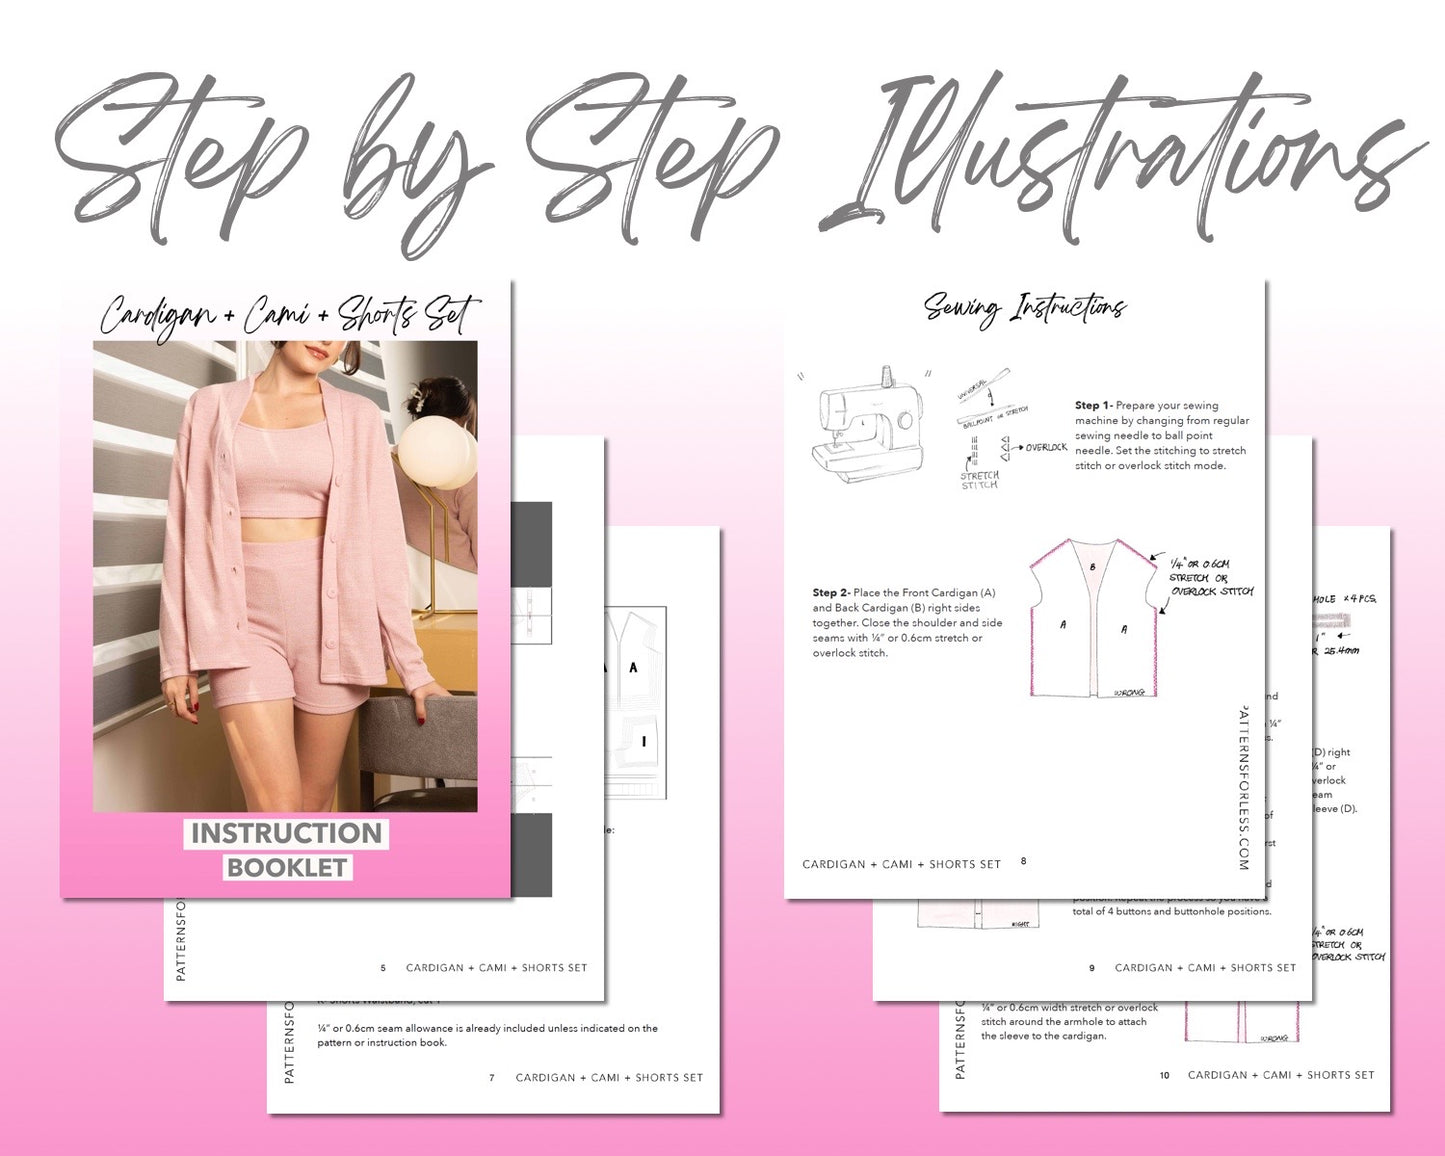 Cardigan Crop Top and Shorts Set sewing pattern step by step illustrations.